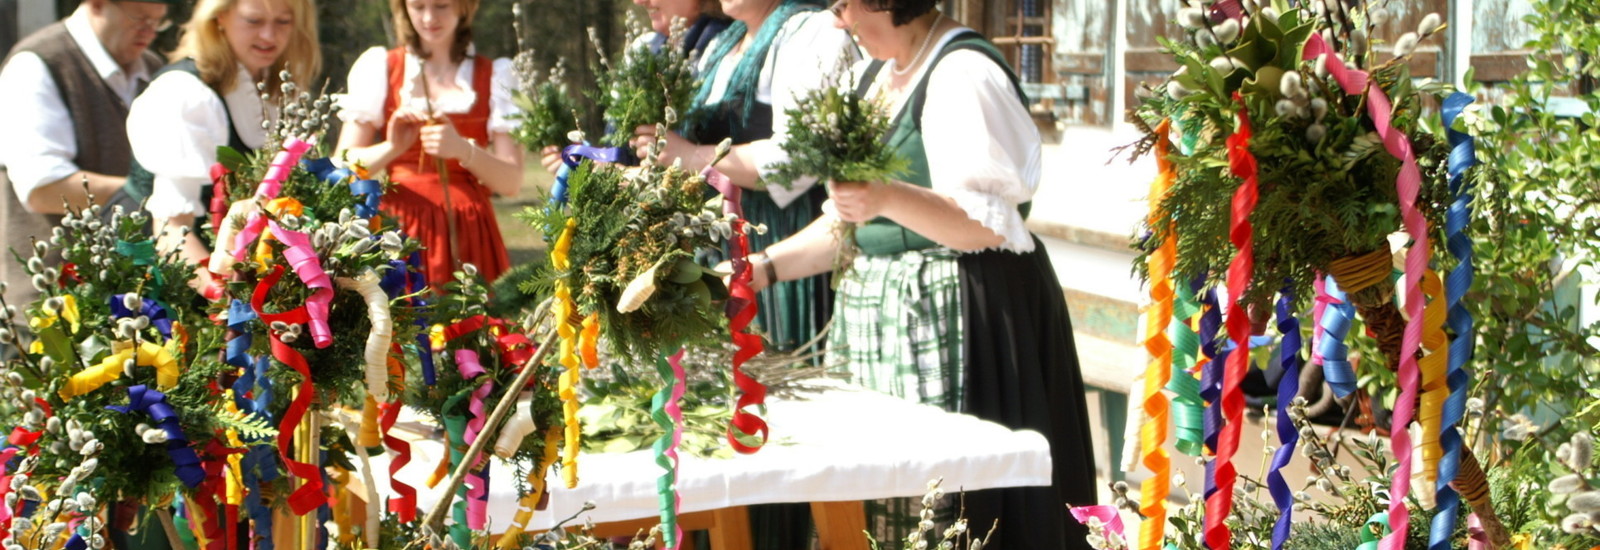                 Women in traditional costumes and the finished "Palmbuschen"             